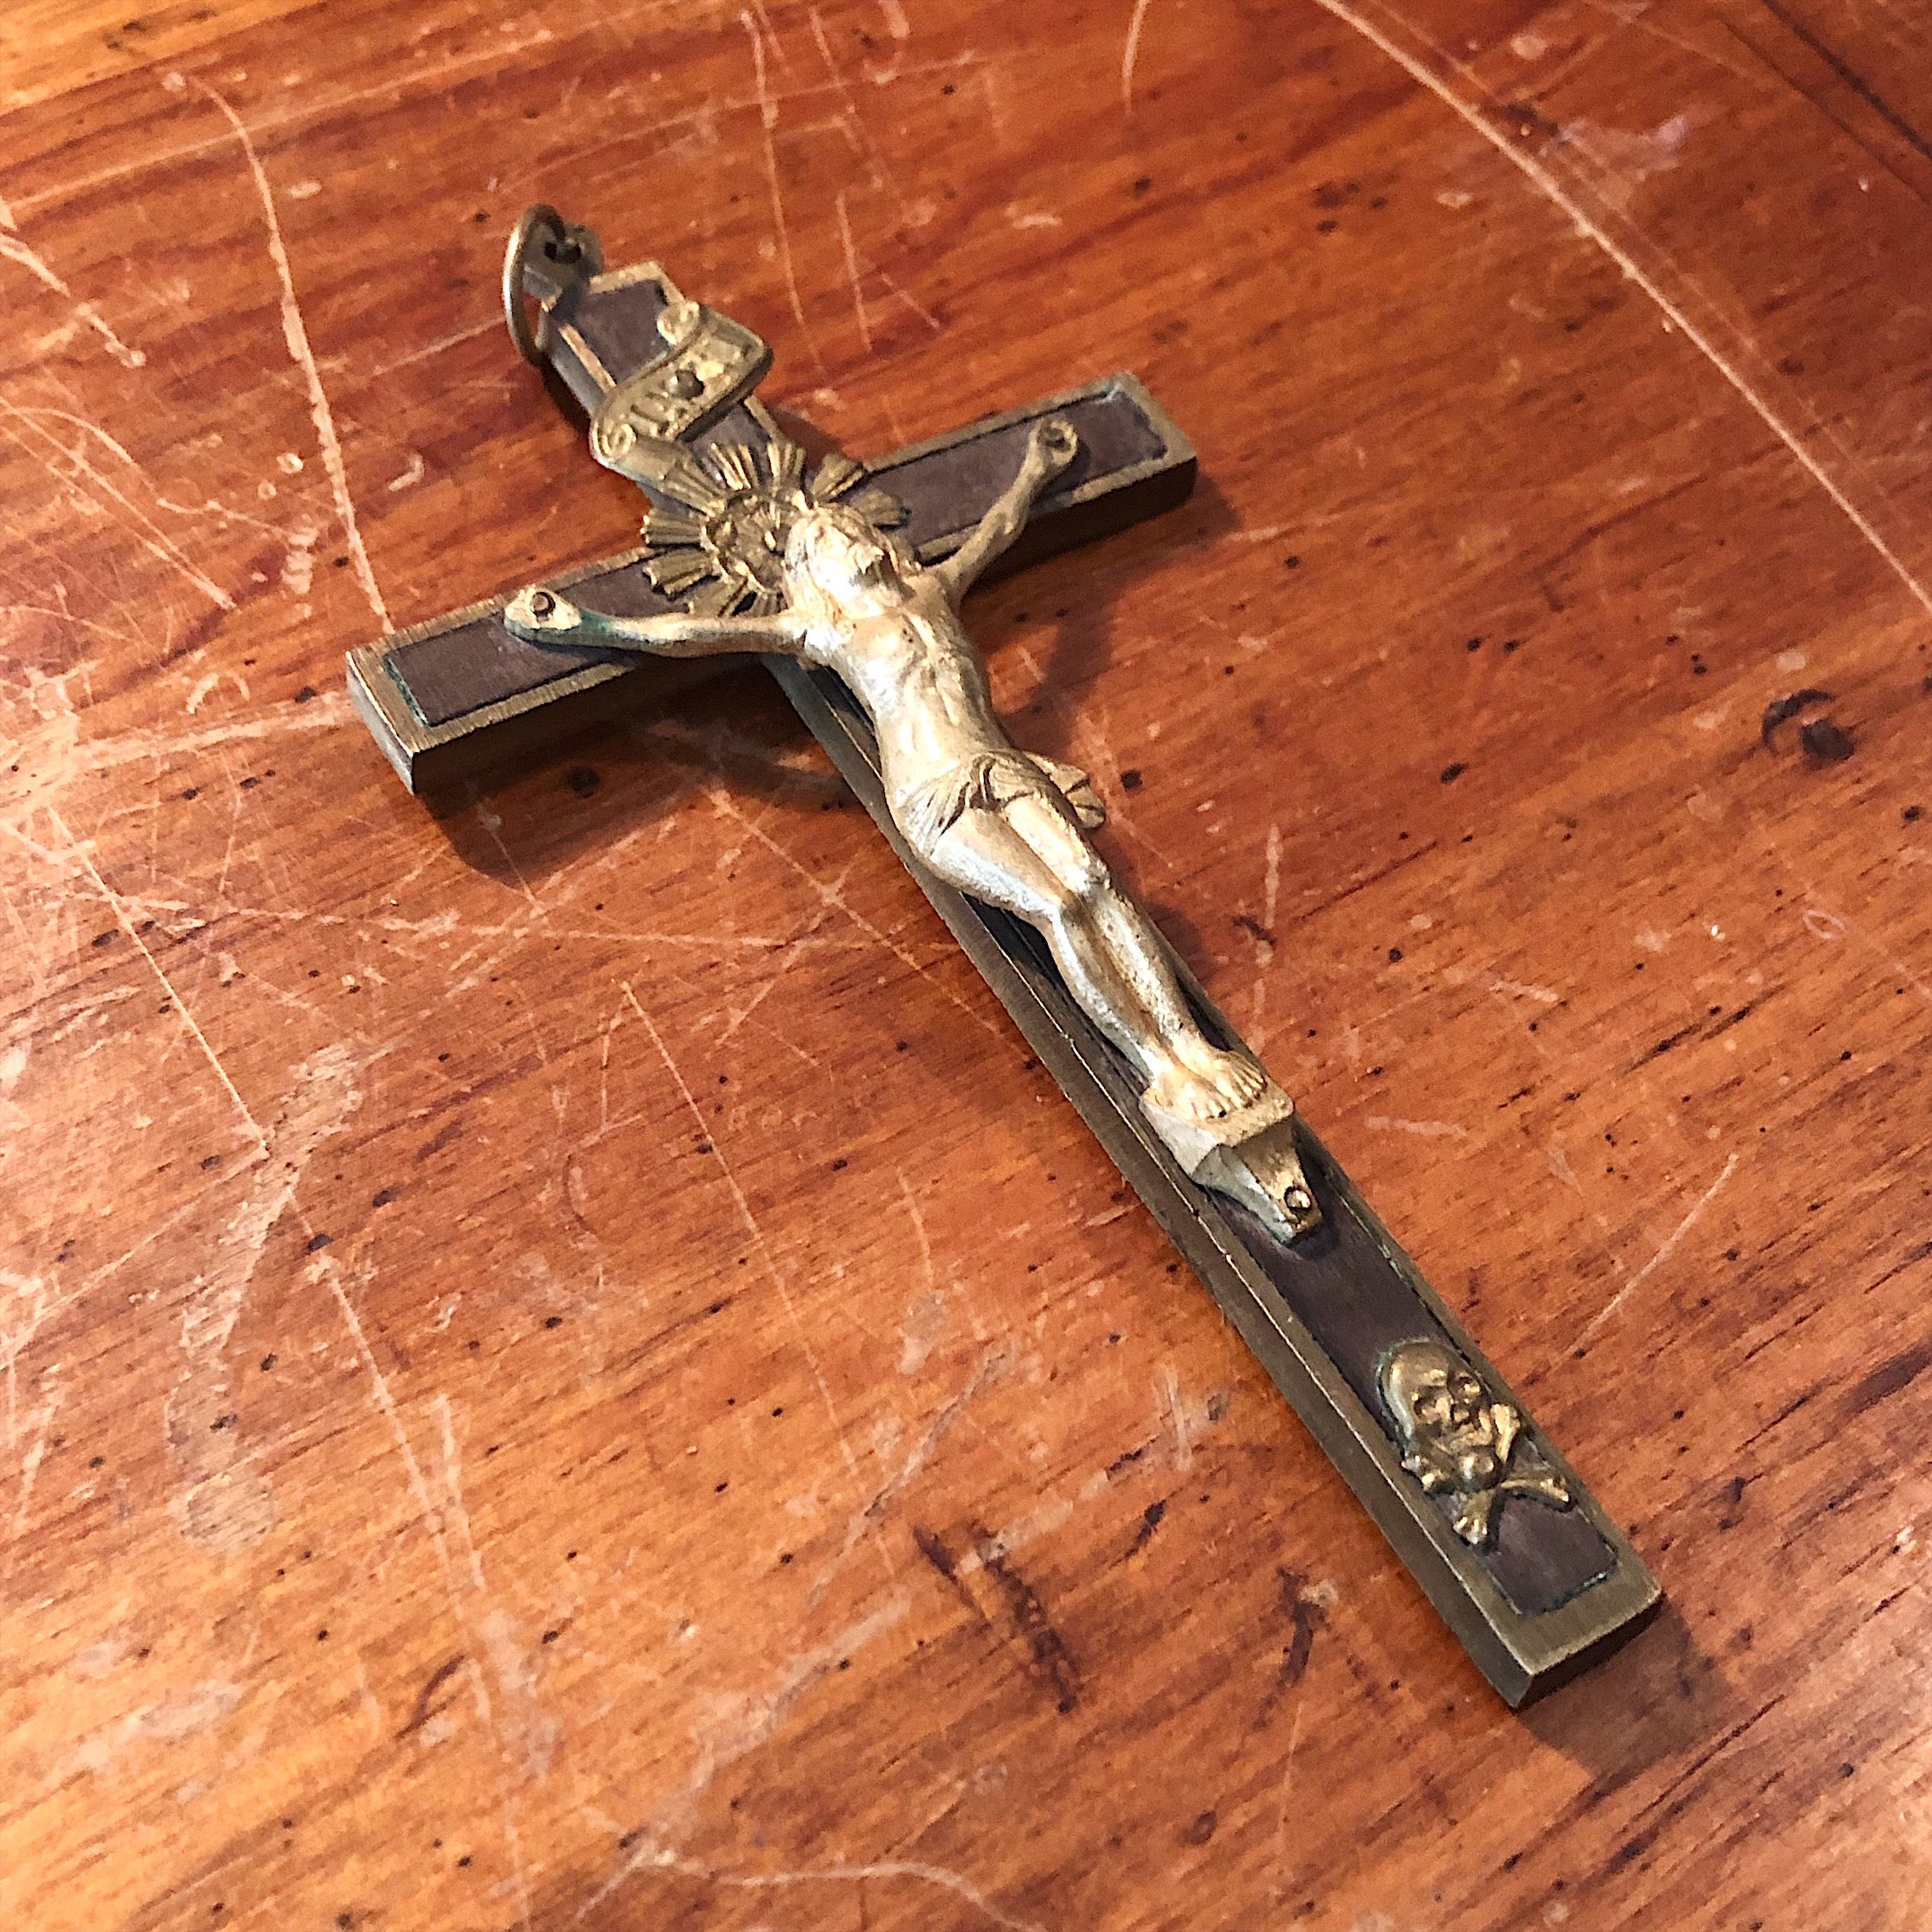 Antique Brass Crucifix with Smiling Skull and Crossbones - Early 1900s  - Vintage Inlay Pectoral Cross - Priest Nuns - Necklace Pendant?